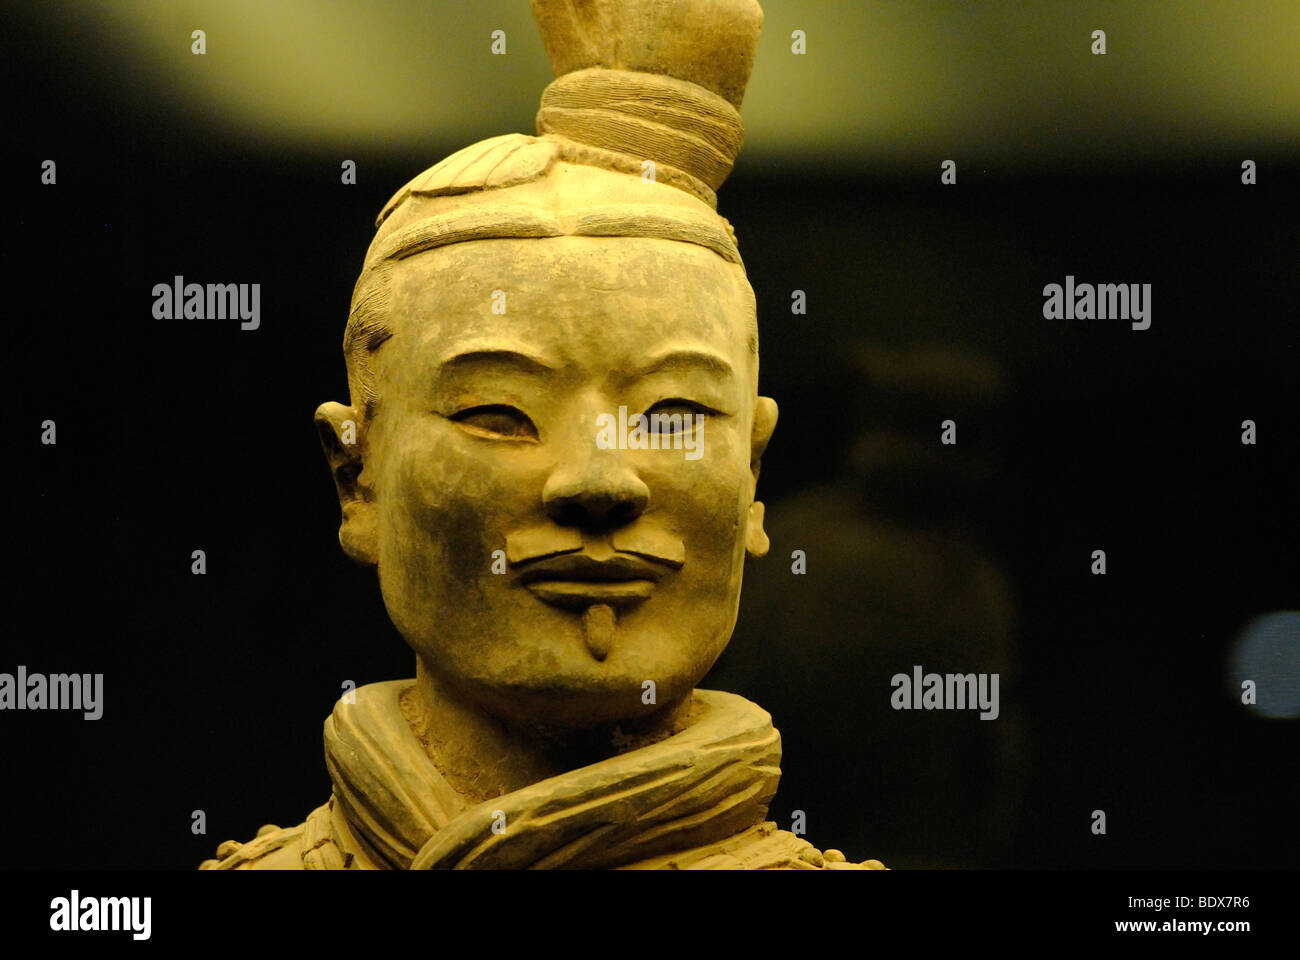 Terracotta army, part of the burial site, hall 1, mausoleum of the 1st Emperor Qin Shihuangdi in Xi'an, Shaanxi Province, China Stock Photo